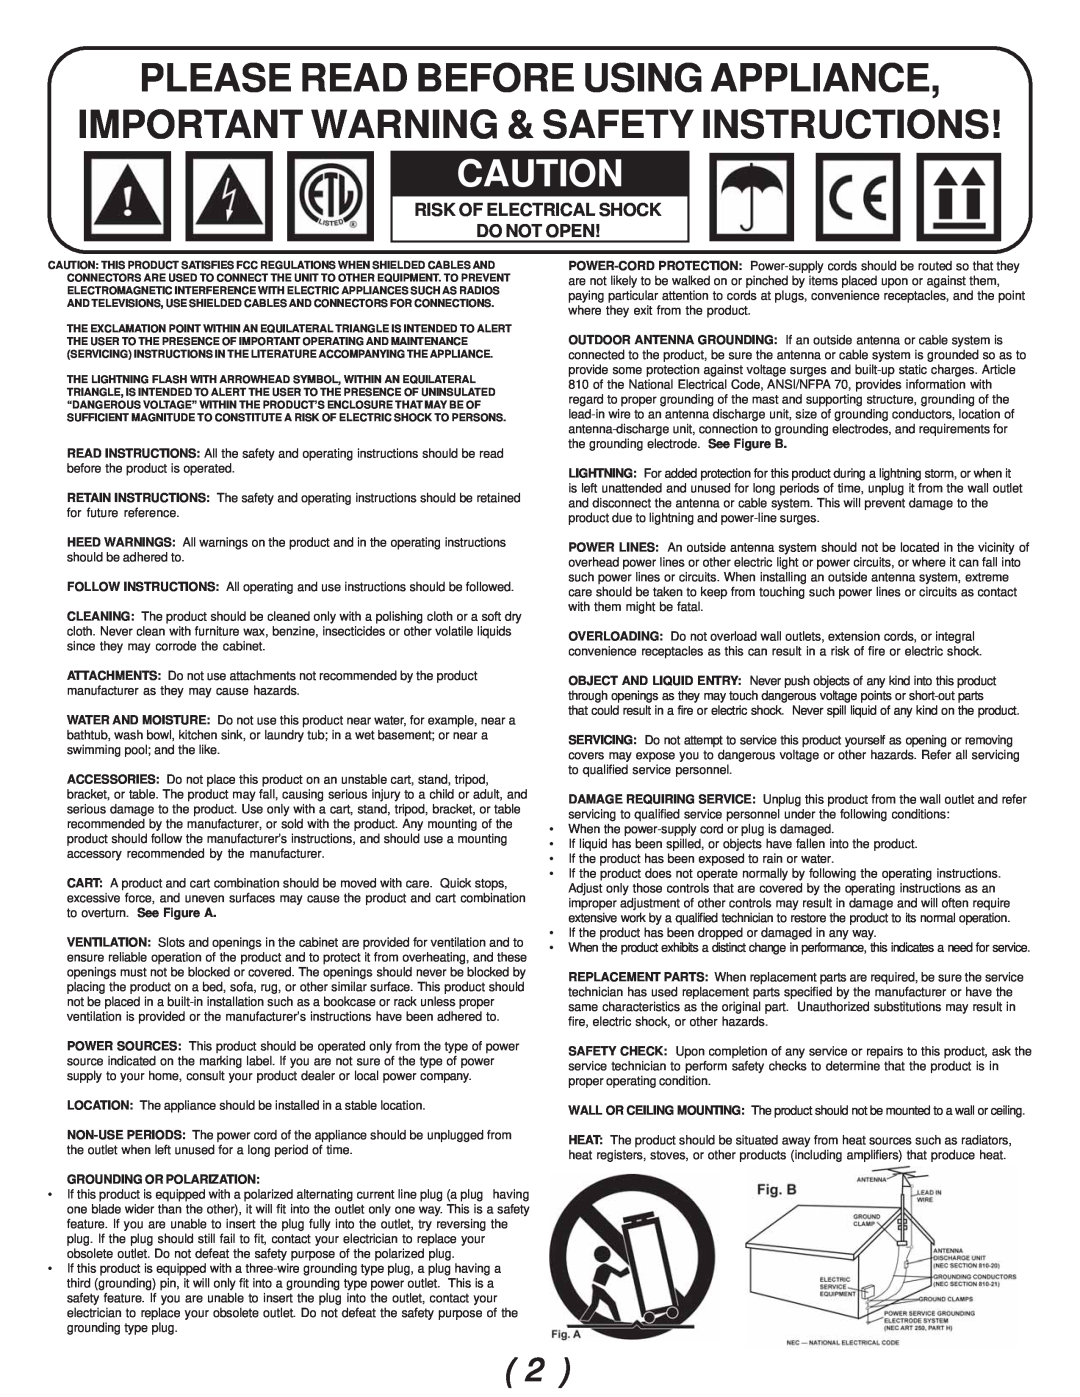 Gemini CDJ-02 manual Please Read Before Using Appliance, Important Warning & Safety Instructions, Grounding Or Polarization 